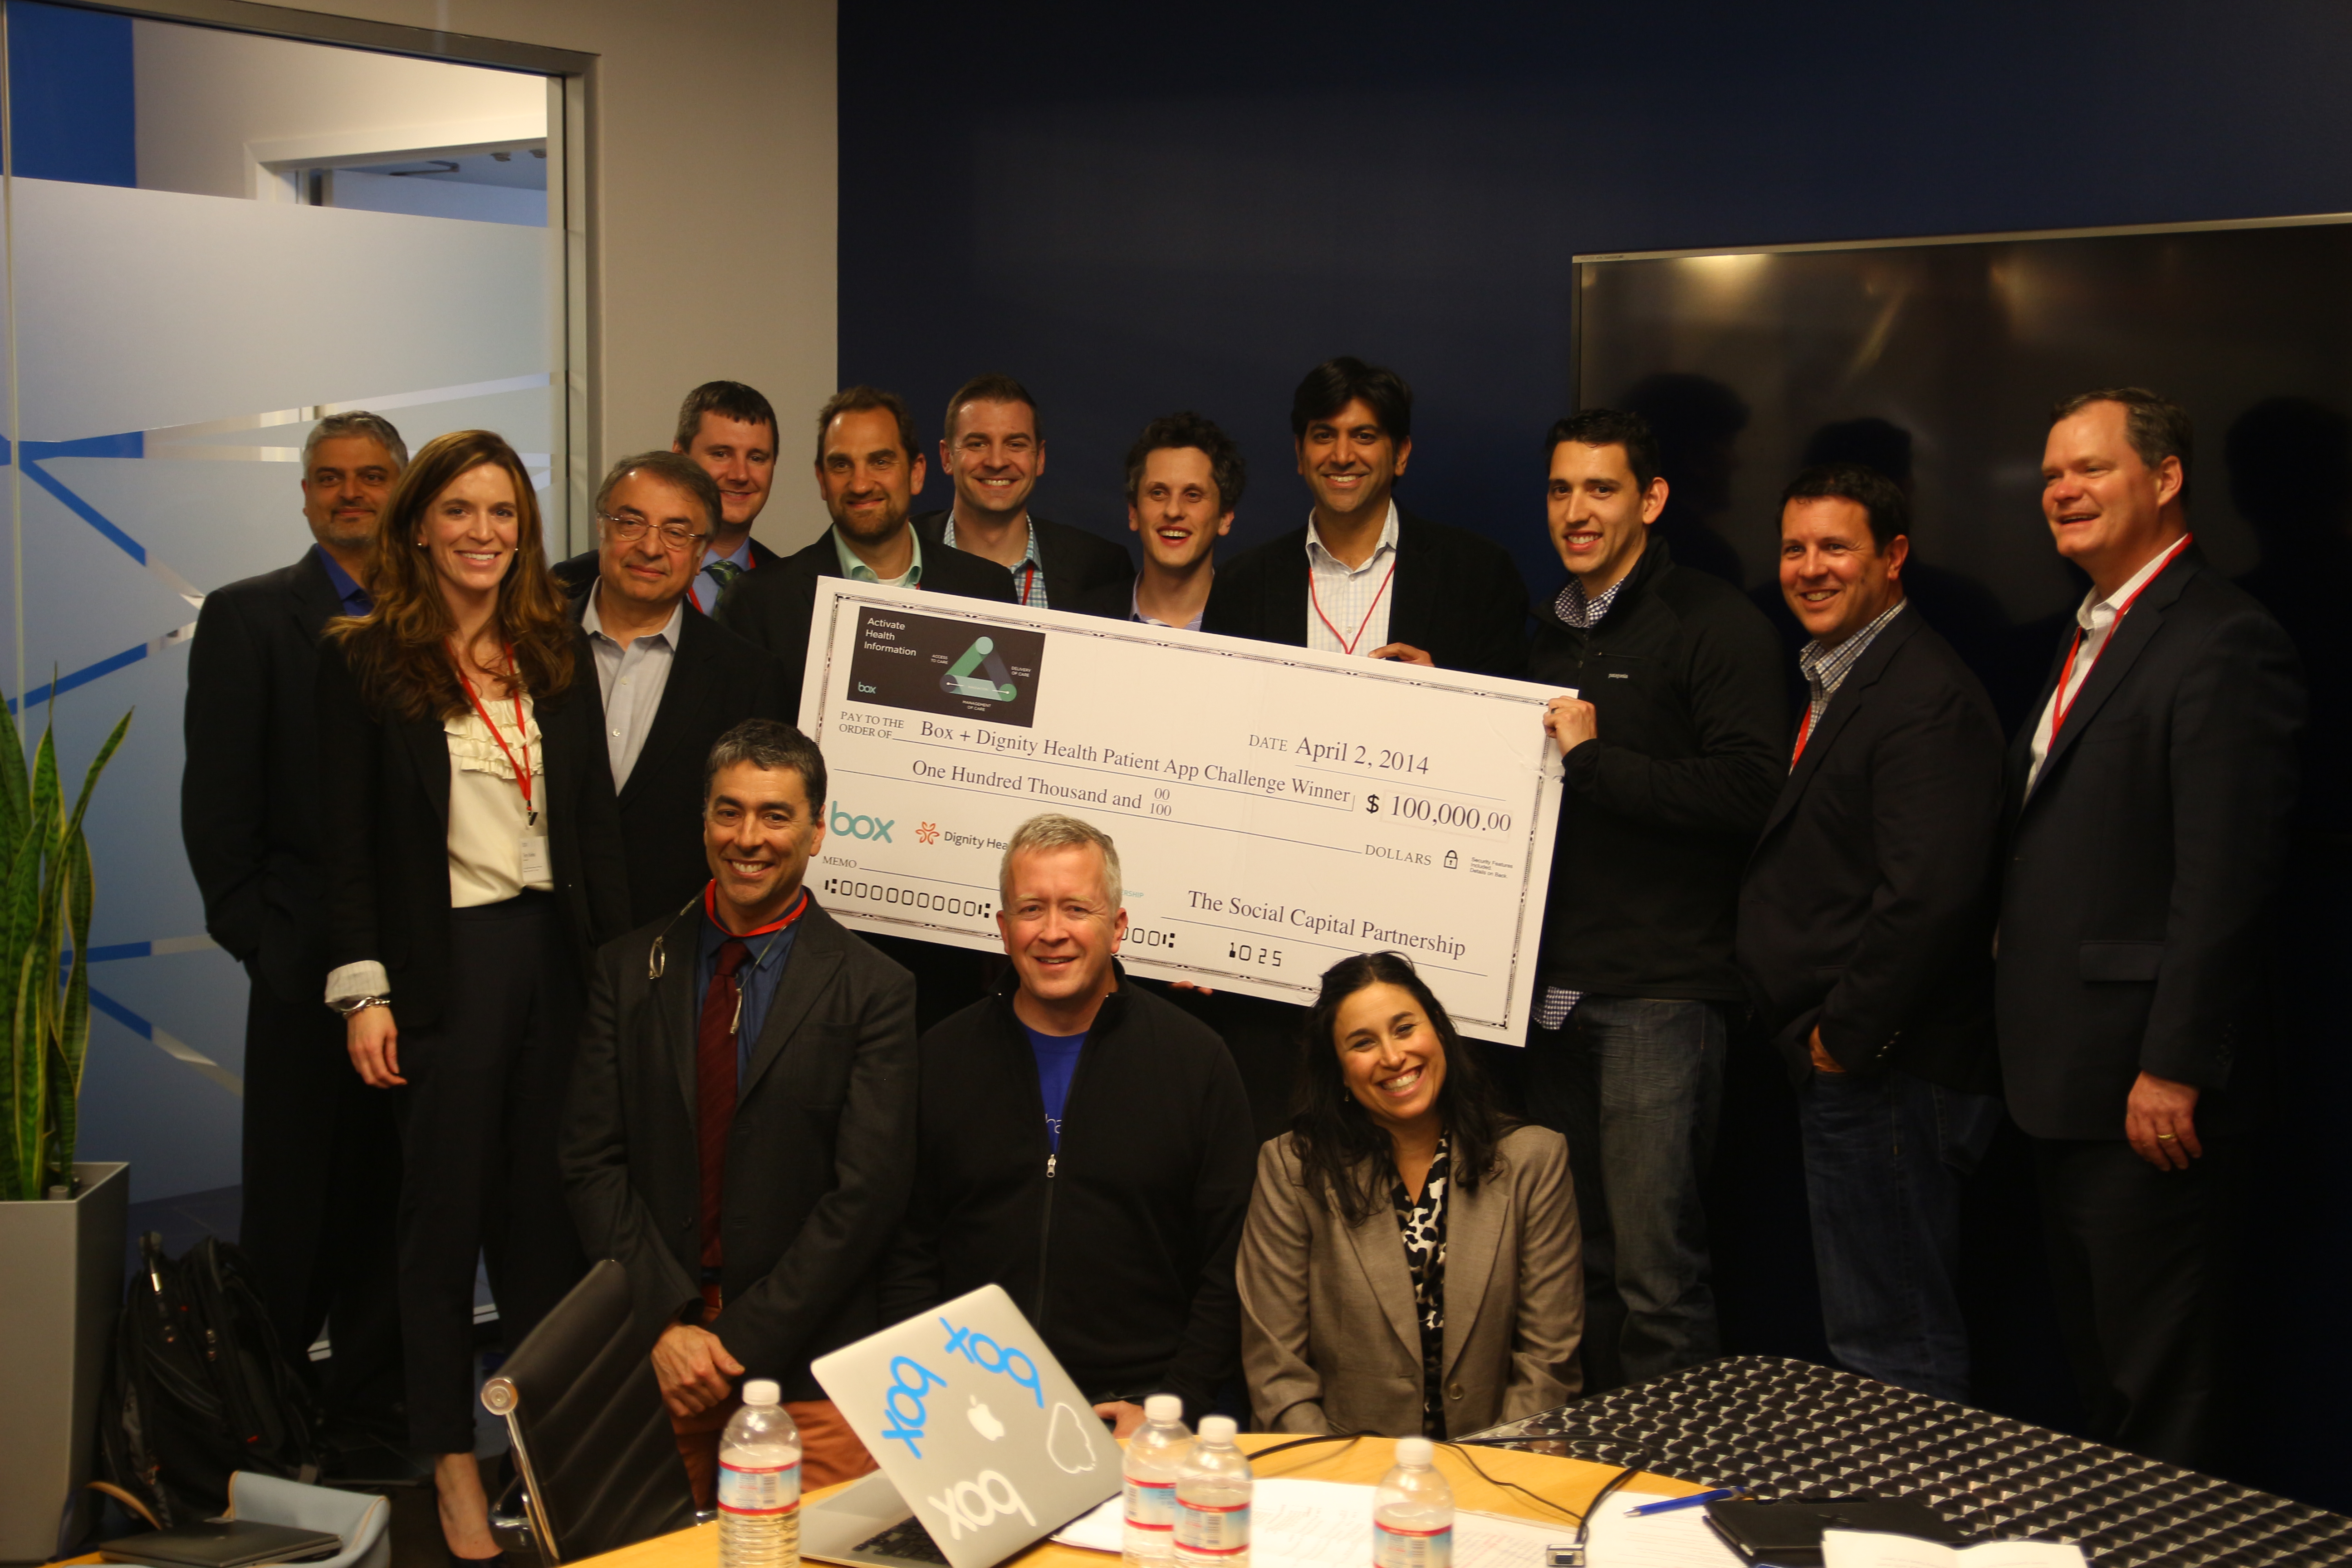 WeIVU Named Winner of Box and Dignity Health Patient Education App Challenge